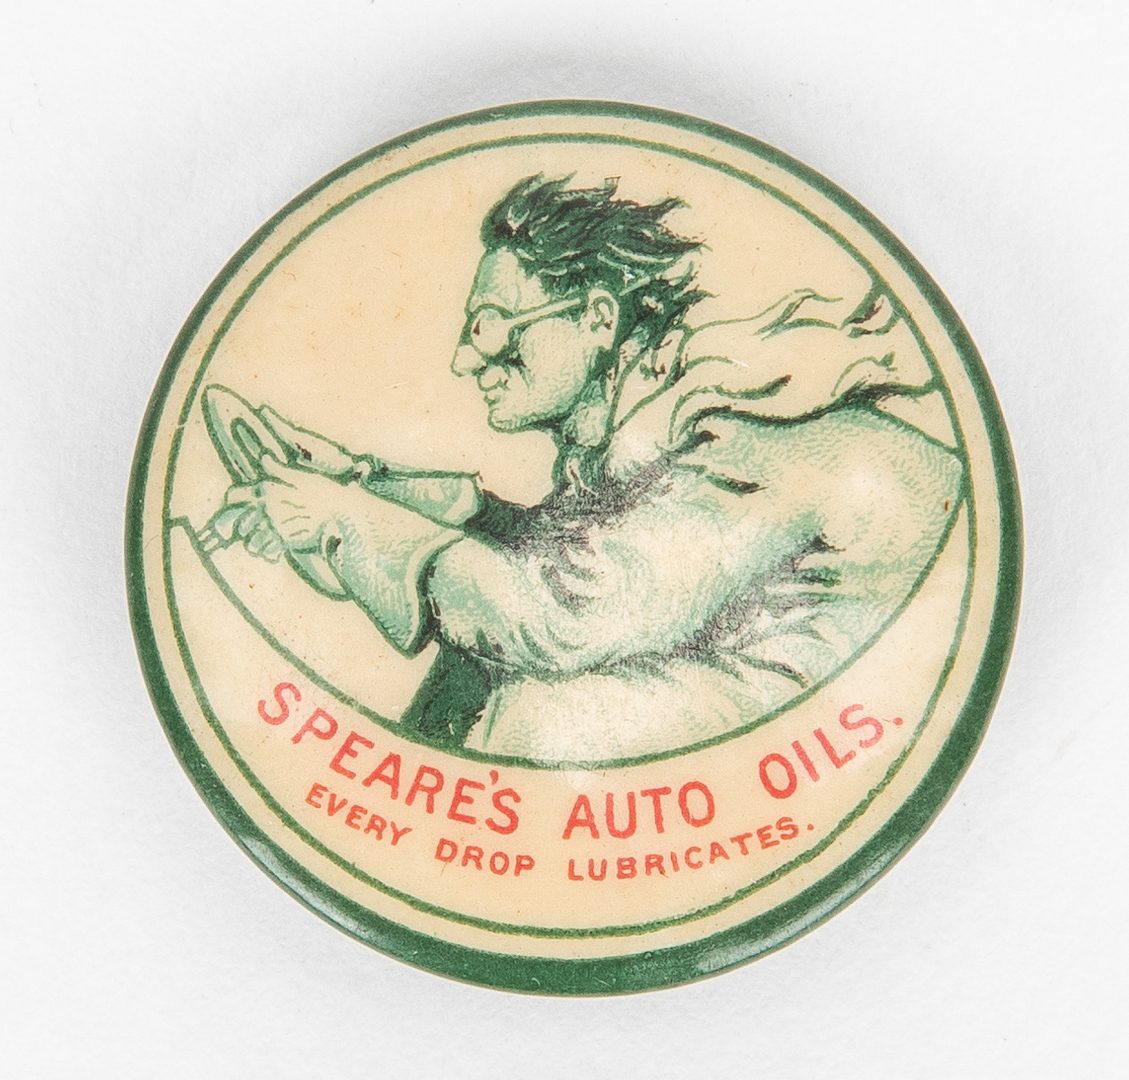 Lot 720: 86 Early Pinback Buttons, Incl. Rare Speares Auto Oils, Union, Strike & Local Political Buttons